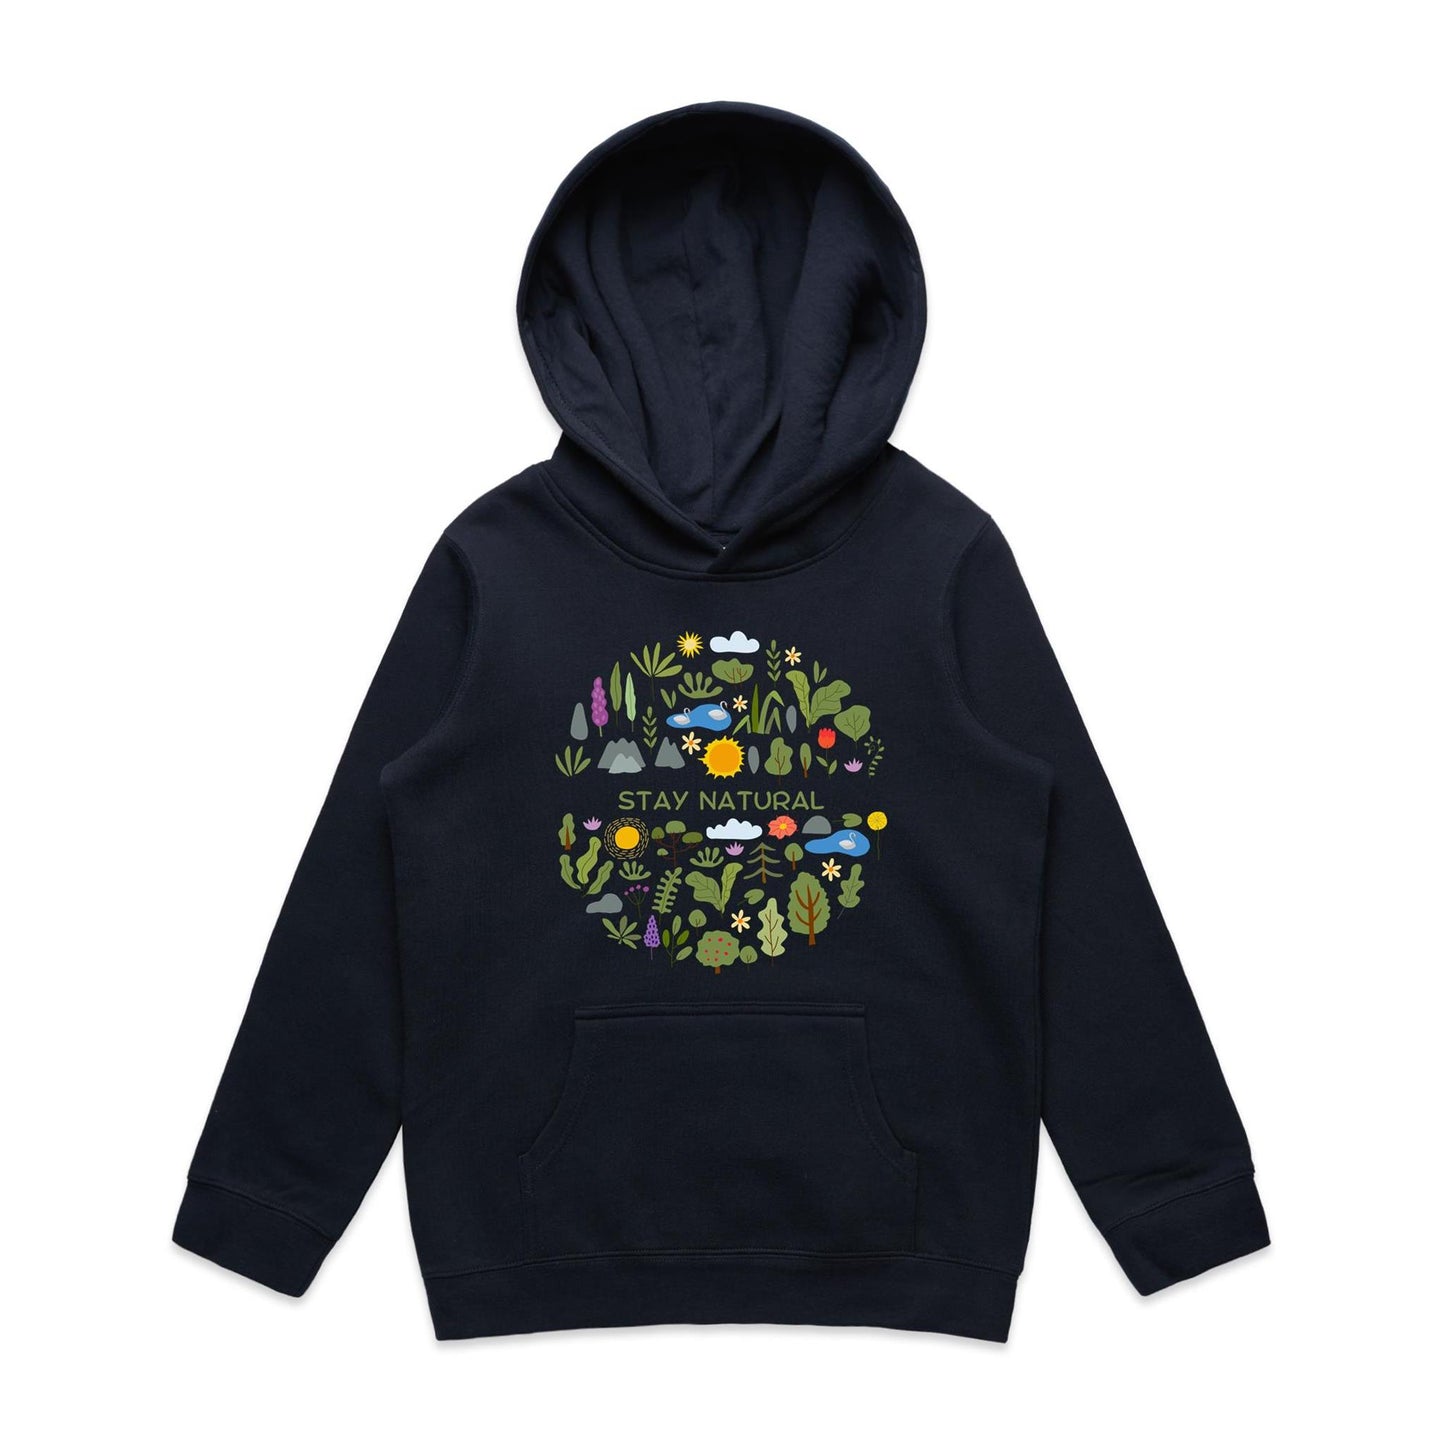 Stay Natural - Youth Supply Hood Navy Kids Hoodie Plants